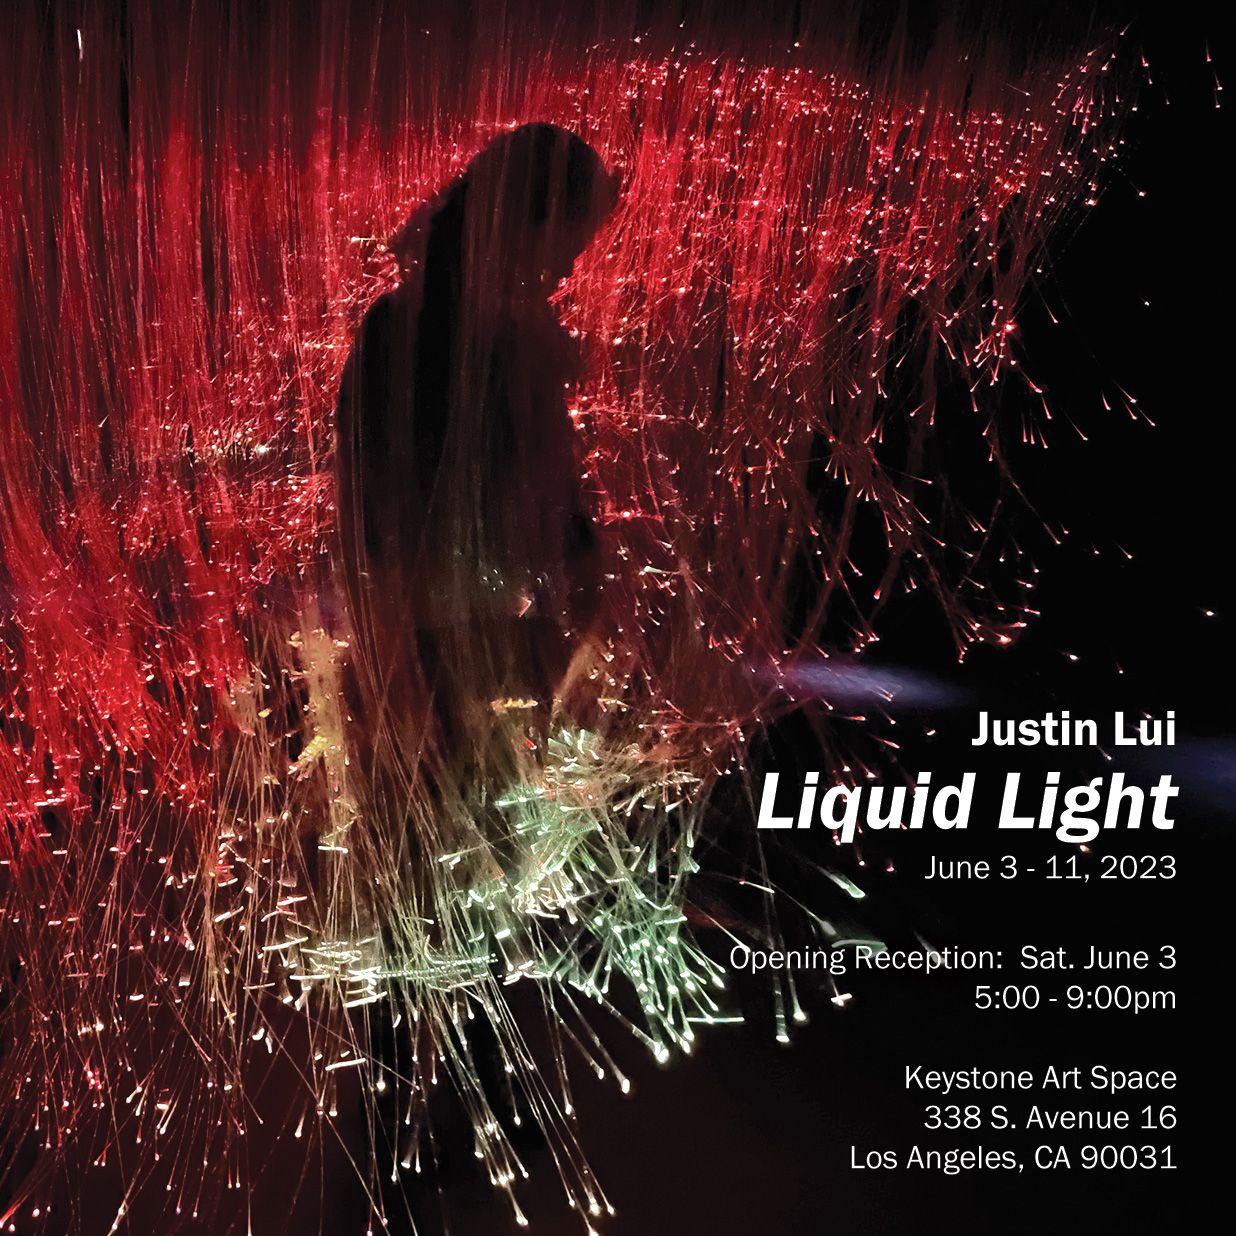 A dark room is filled with glowing red fiber-optic threads which hang from the ceiling.  A silhouetted figure stands among these glowing fibers.  White text written across the image says: Justin Lui Liquid Light June 3 - 11, 2023  Opening Reception:  Satu